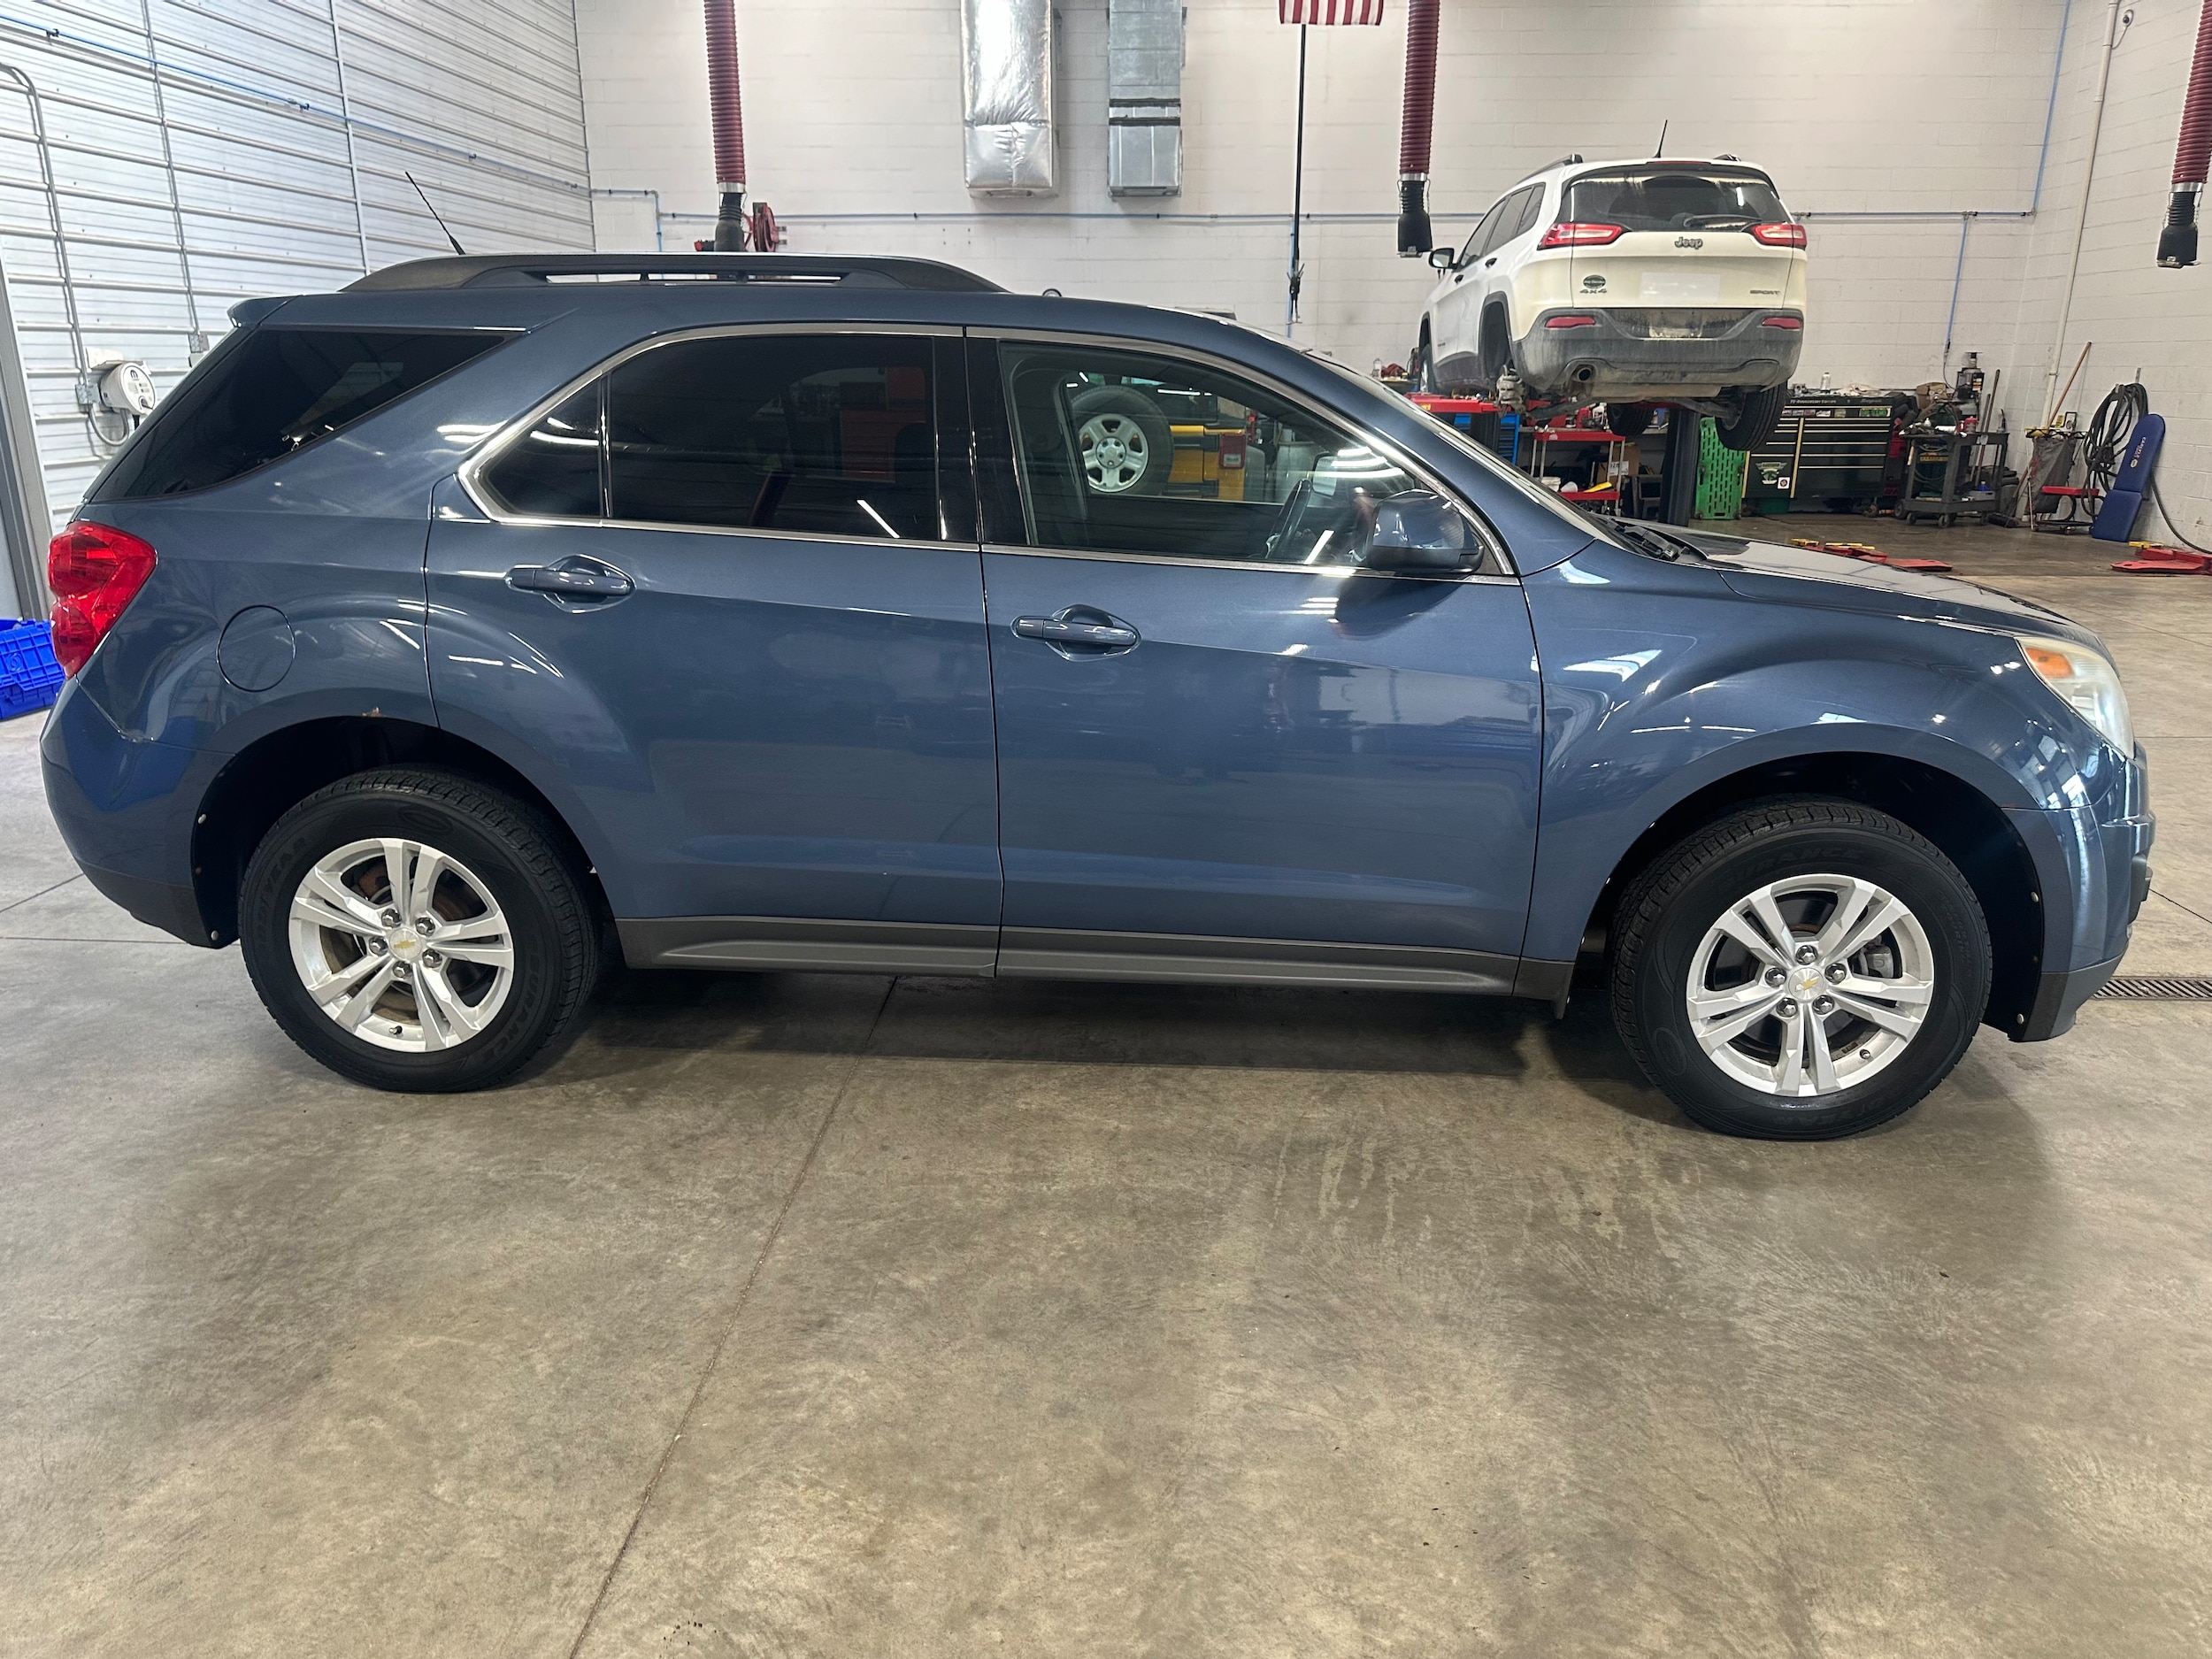 Used 2011 Chevrolet Equinox 1LT with VIN 2CNALDEC2B6342805 for sale in Galena, IL